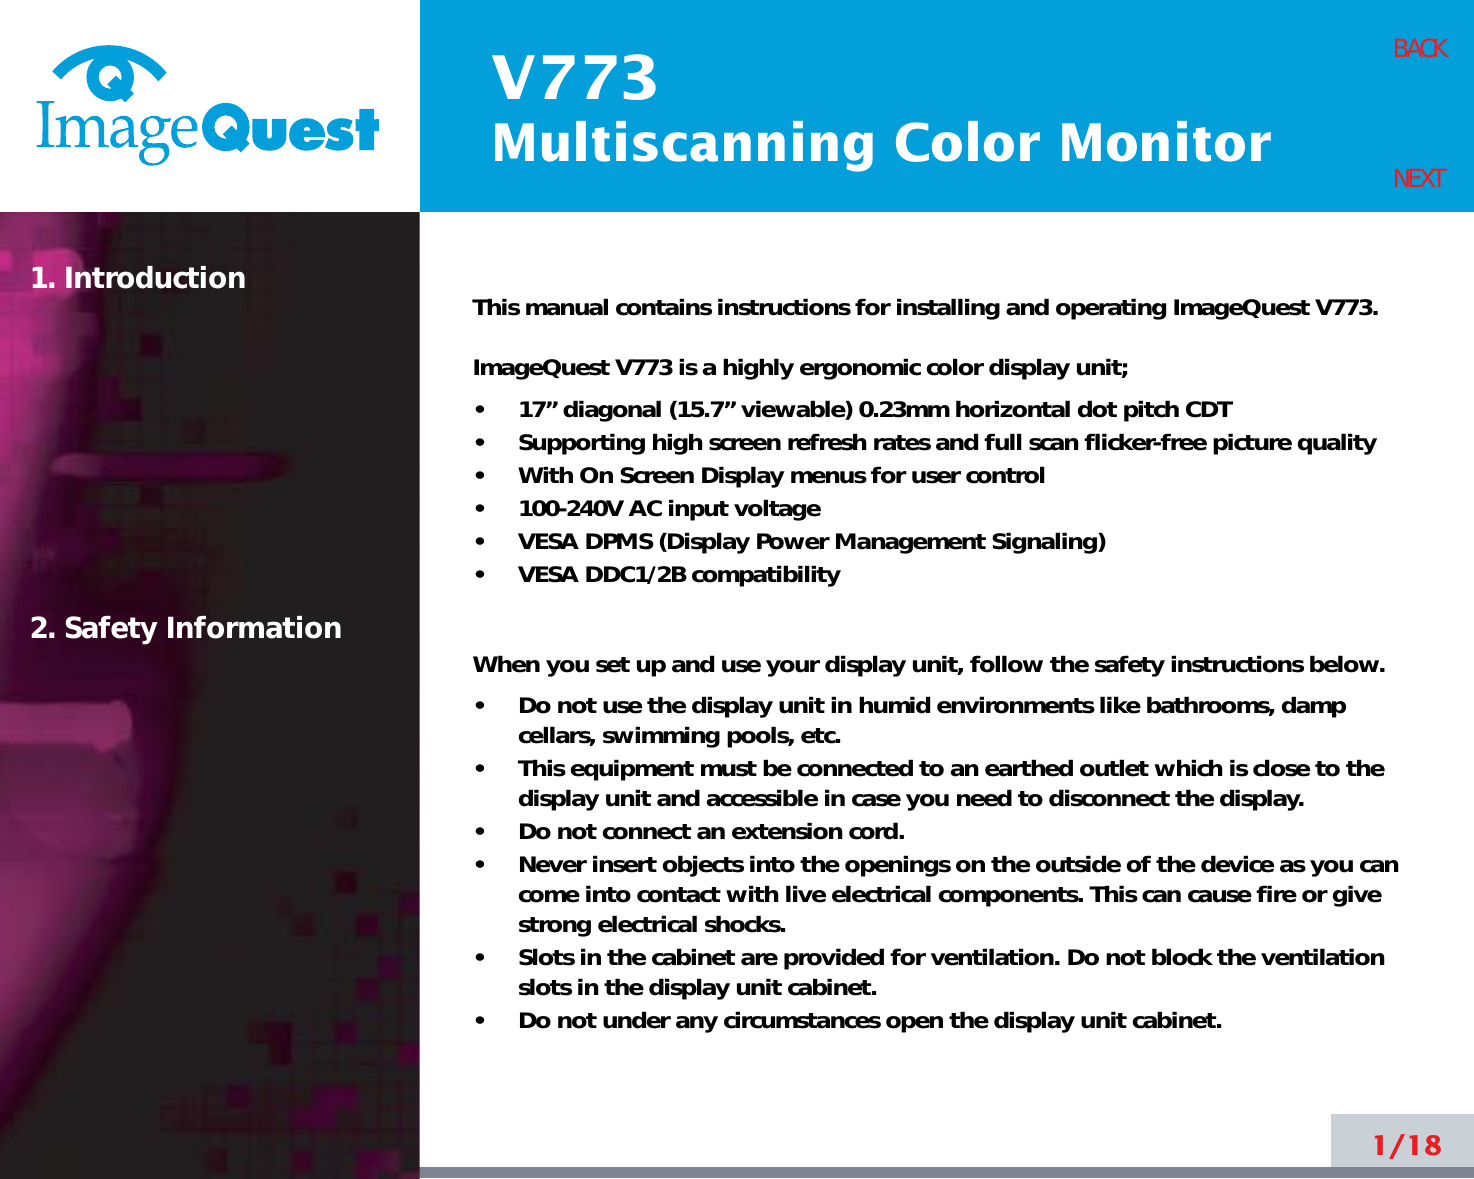 V773Multiscanning Color Monitor1/18BACKNEXT1. Introduction2. Safety InformationThis manual contains instructions for installing and operating ImageQuest V773.ImageQuest V773 is a highly ergonomic color display unit; •     17” diagonal (15.7” viewable) 0.23mm horizontal dot pitch CDT•     Supporting high screen refresh rates and full scan flicker-free picture quality•     With On Screen Display menus for user control•     100-240V AC input voltage•     VESA DPMS (Display Power Management Signaling)•     VESA DDC1/2B compatibilityWhen you set up and use your display unit, follow the safety instructions below.•     Do not use the display unit in humid environments like bathrooms, dampcellars, swimming pools, etc.•     This equipment must be connected to an earthed outlet which is close to thedisplay unit and accessible in case you need to disconnect the display.•     Do not connect an extension cord.•     Never insert objects into the openings on the outside of the device as you cancome into contact with live electrical components. This can cause fire or givestrong electrical shocks.•     Slots in the cabinet are provided for ventilation. Do not block the ventilationslots in the display unit cabinet.•     Do not under any circumstances open the display unit cabinet.